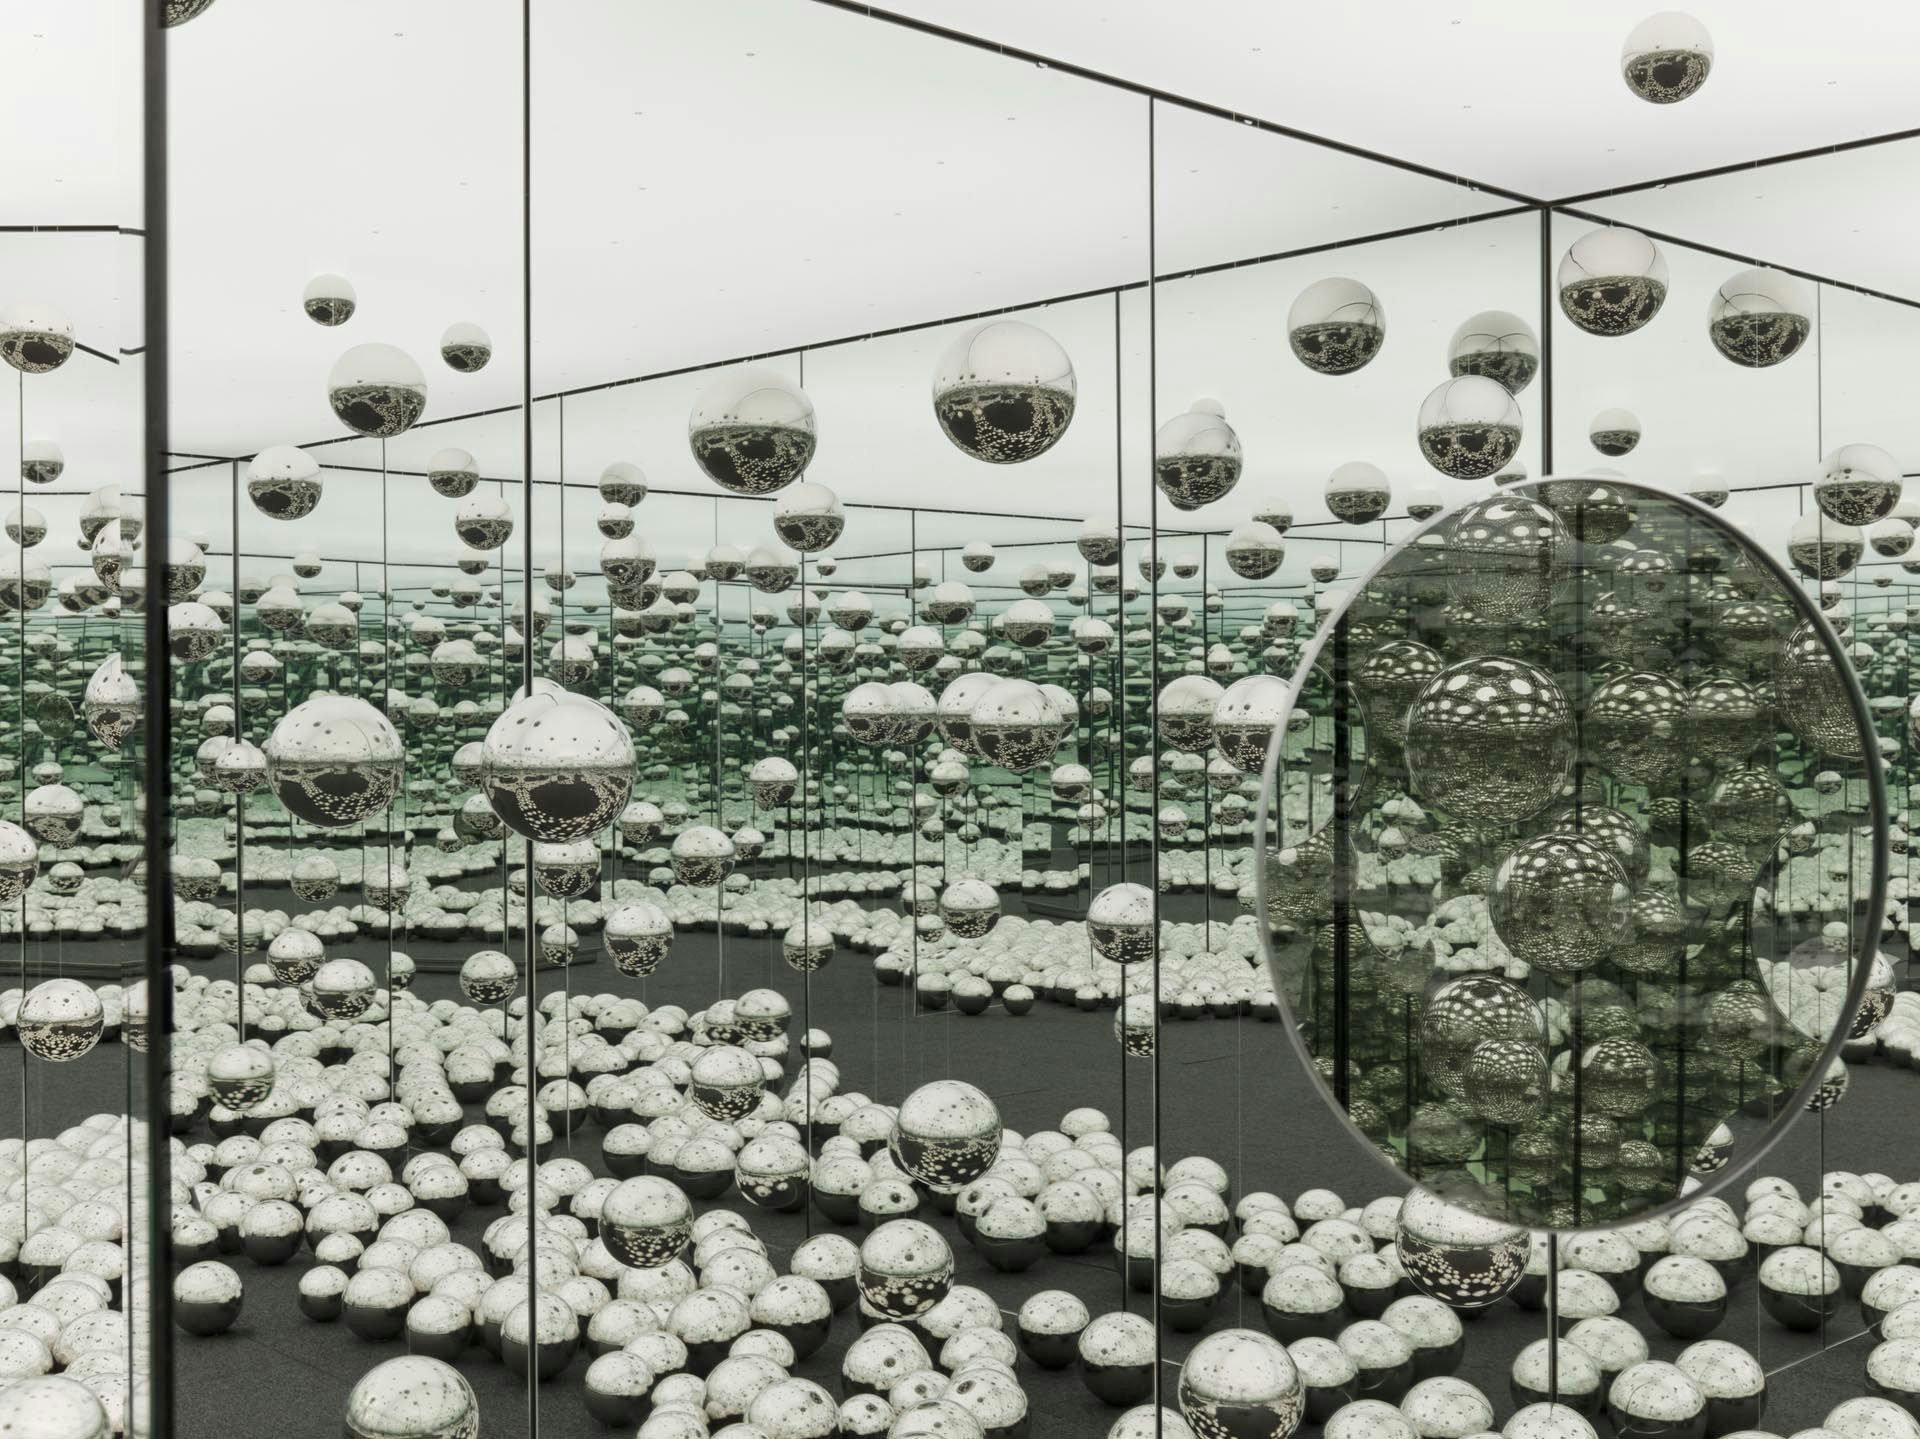 A view of an experiential installation by Yayoi Kusama, comprised of mirrors, wood, LED lighting system, metal, steel balls, and carpeting, titled Infinity Mirrored Room - Let's Survive Forever, dated 2017.